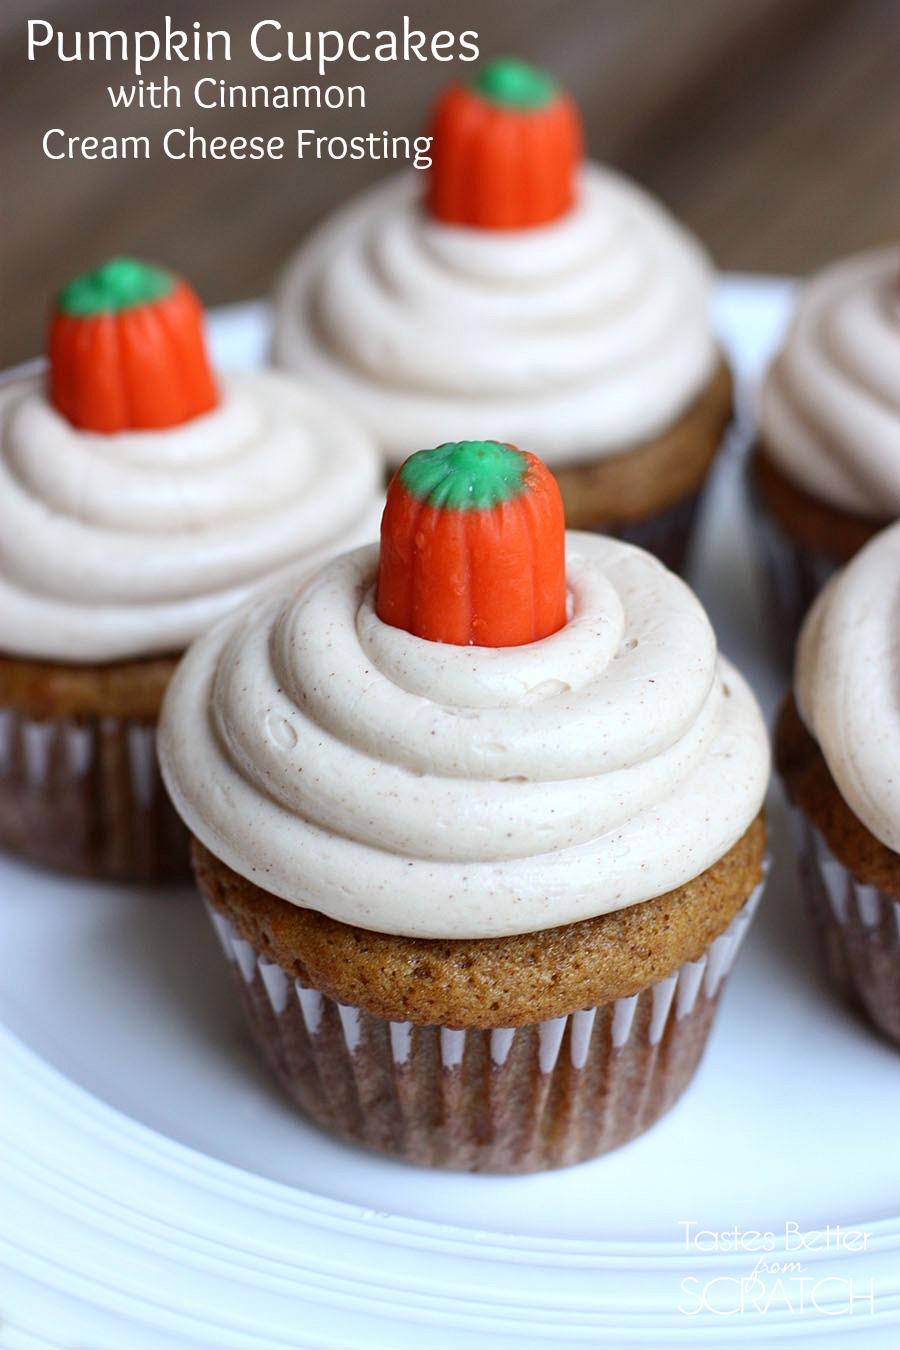 Pumpkin_Cupcakes_with_Cinnamon_Cream_Cheese_Frosting1